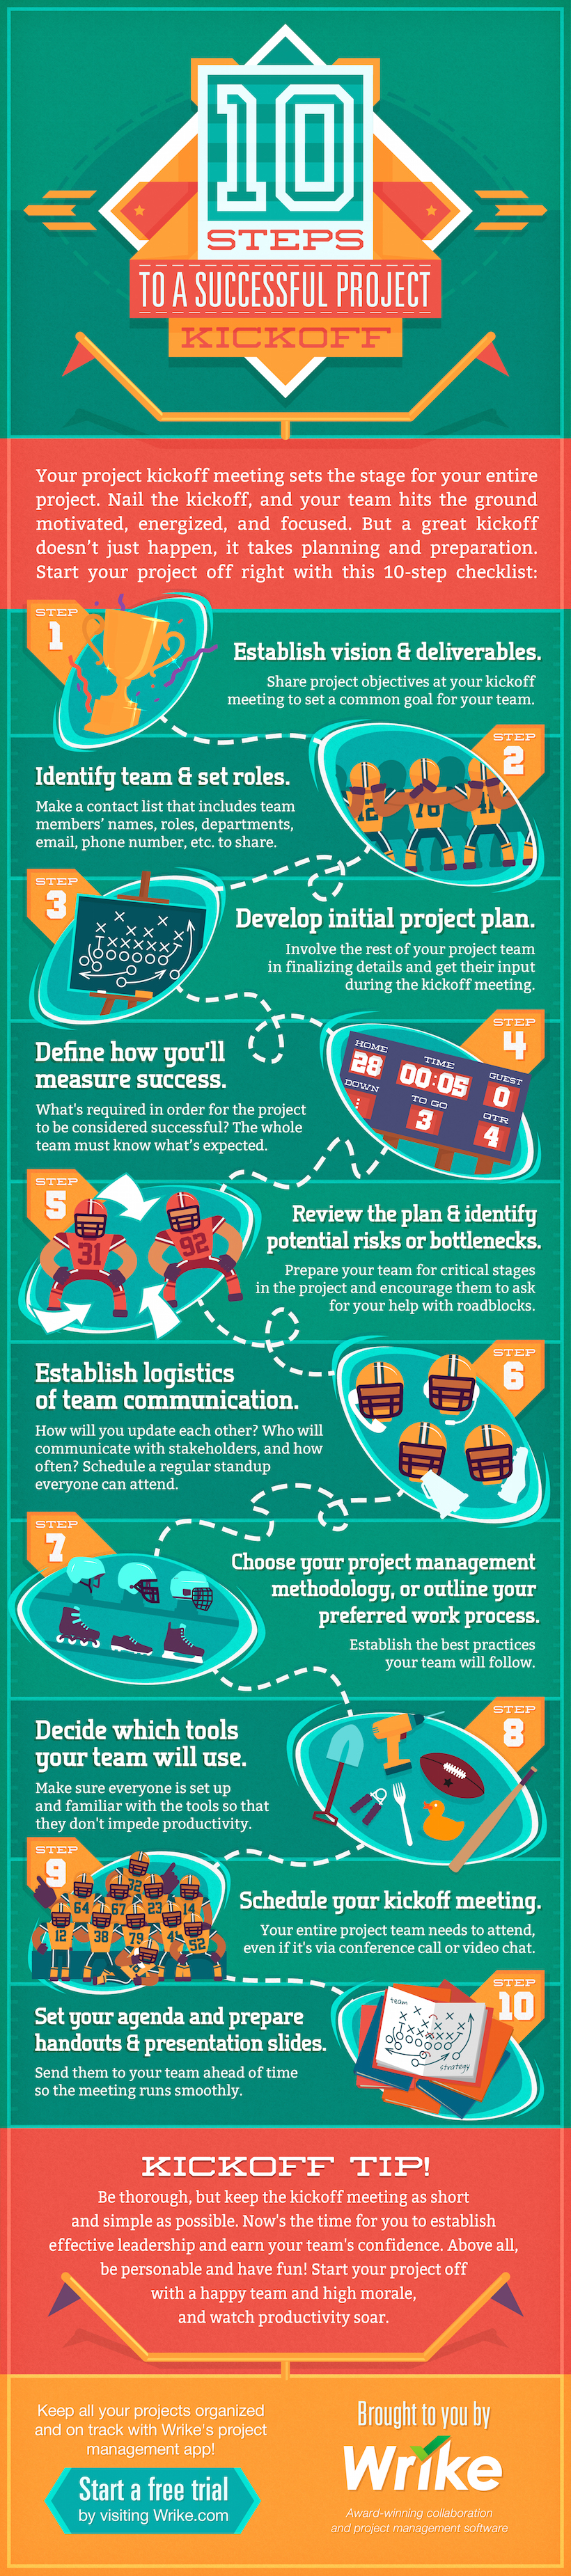 Project Kickoff Meeting Checklist - Infographic